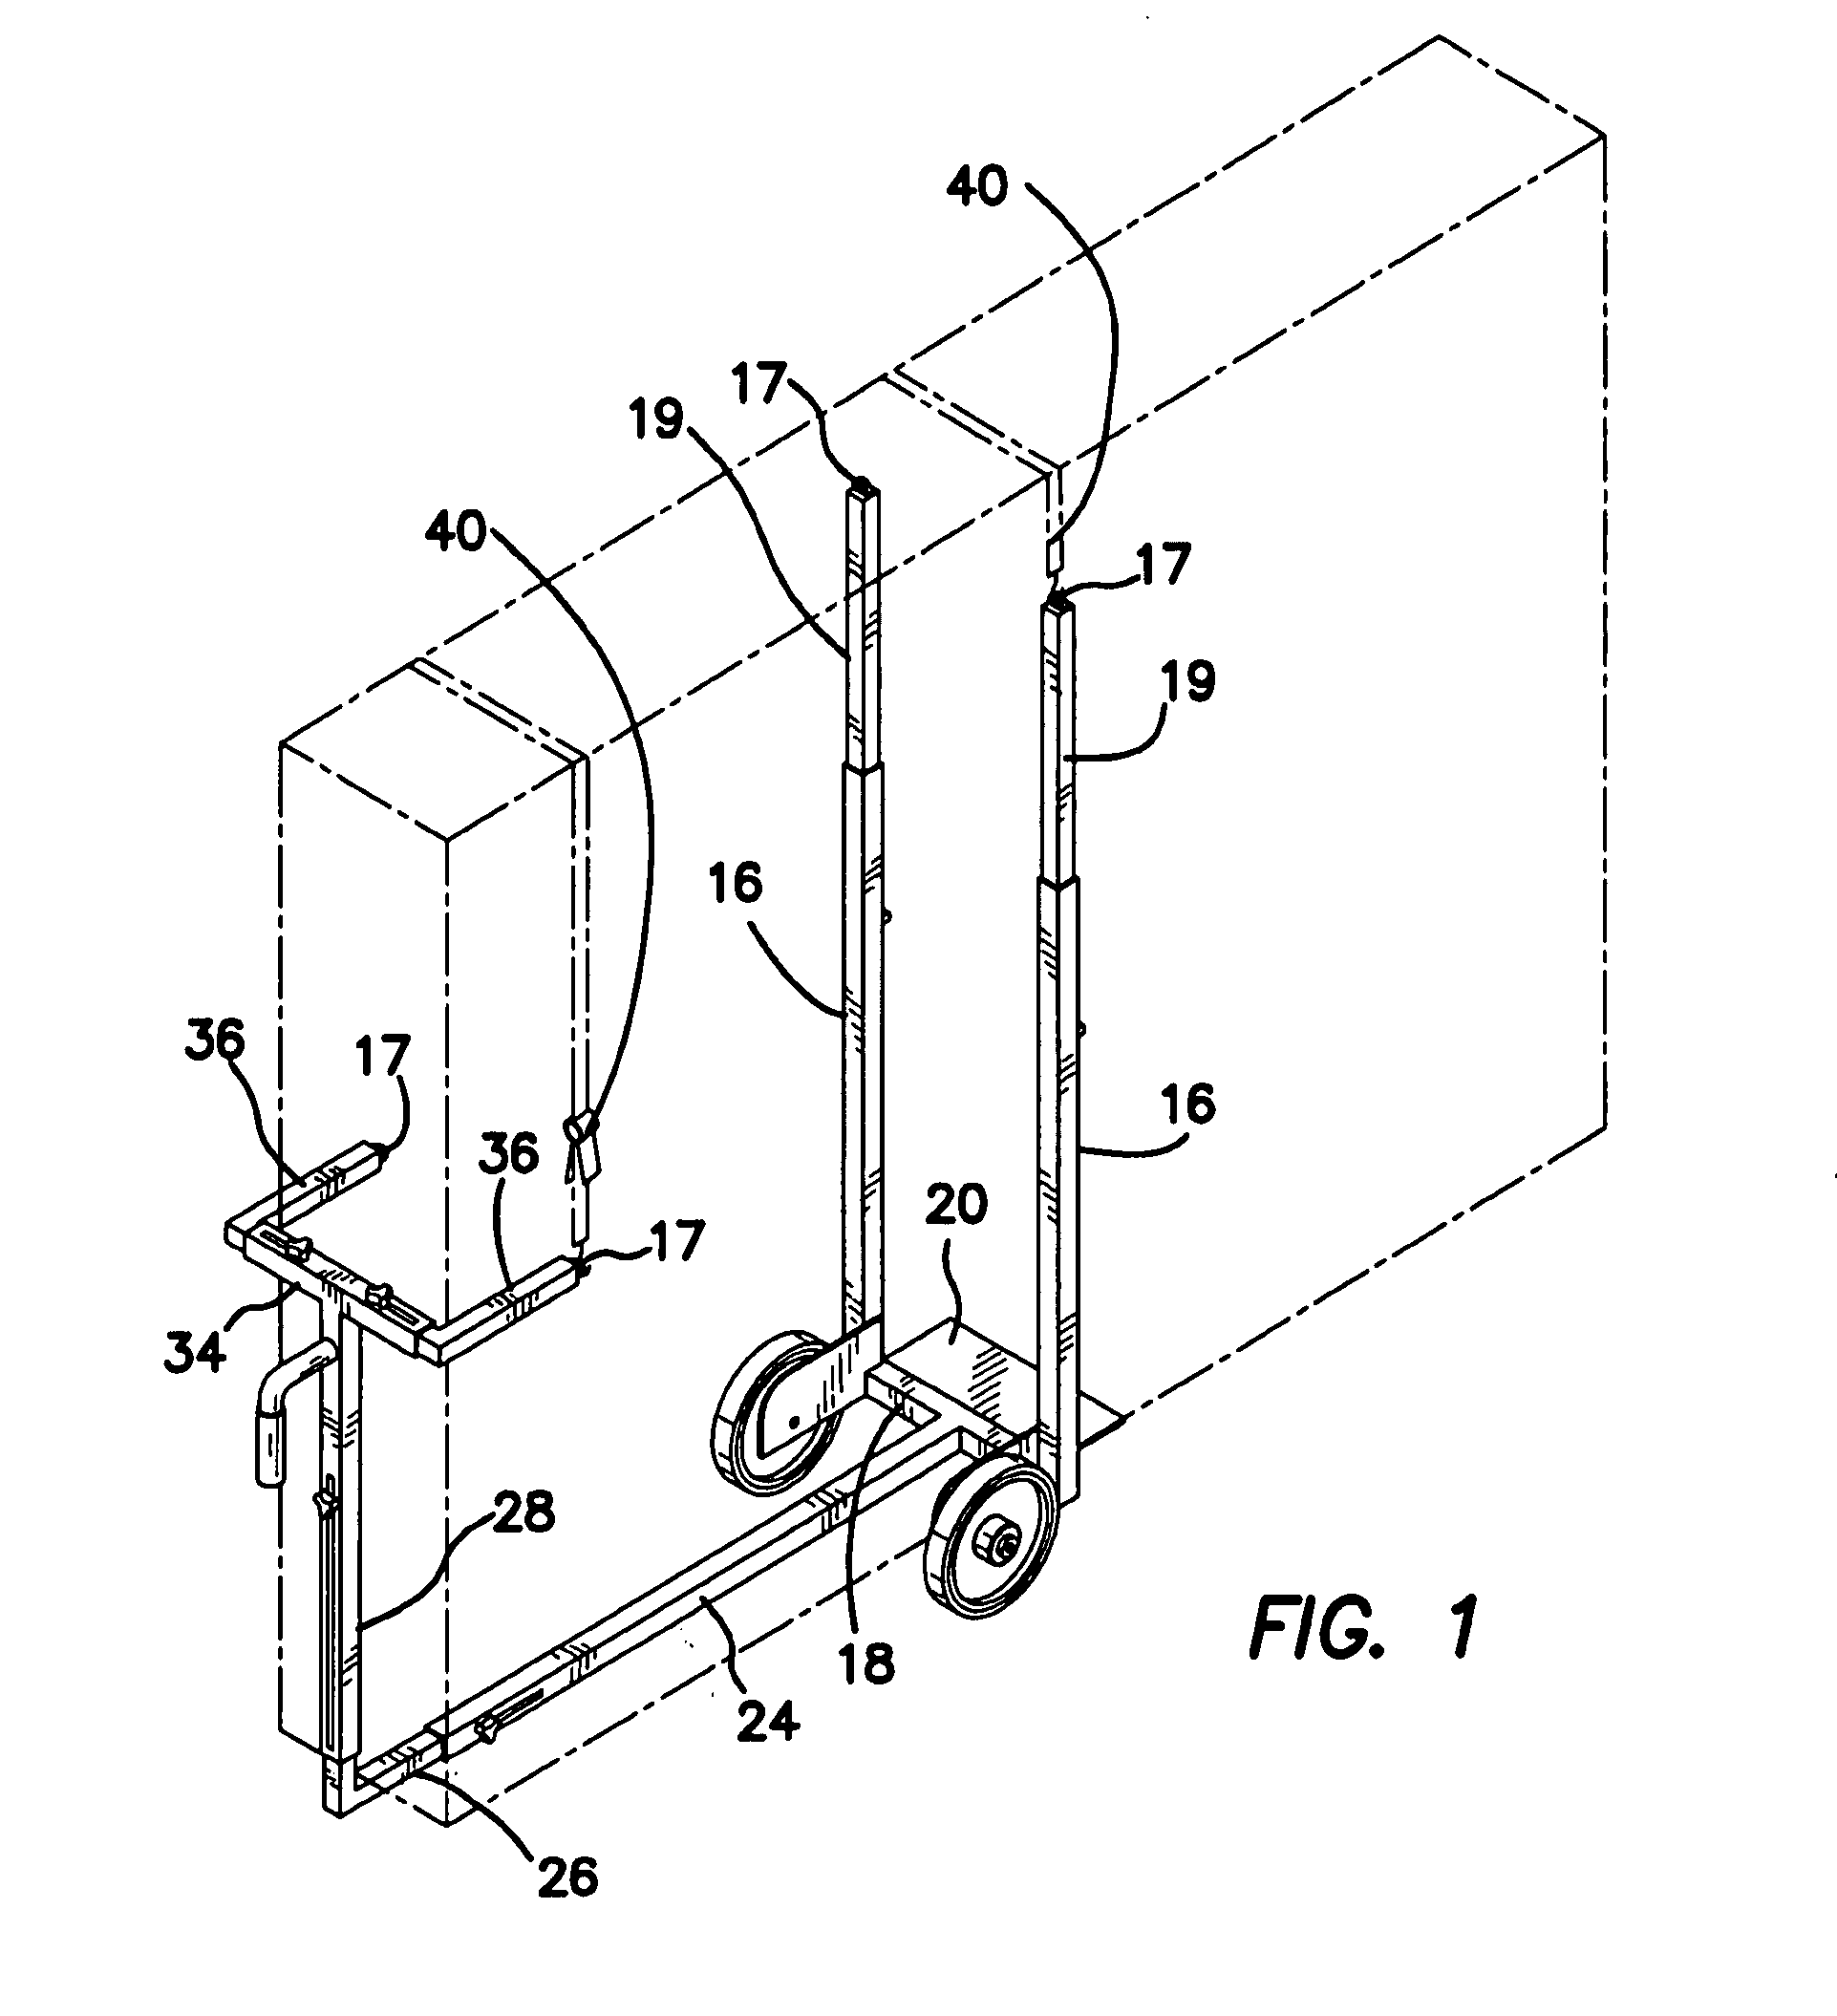 Apparatus for transport of objects